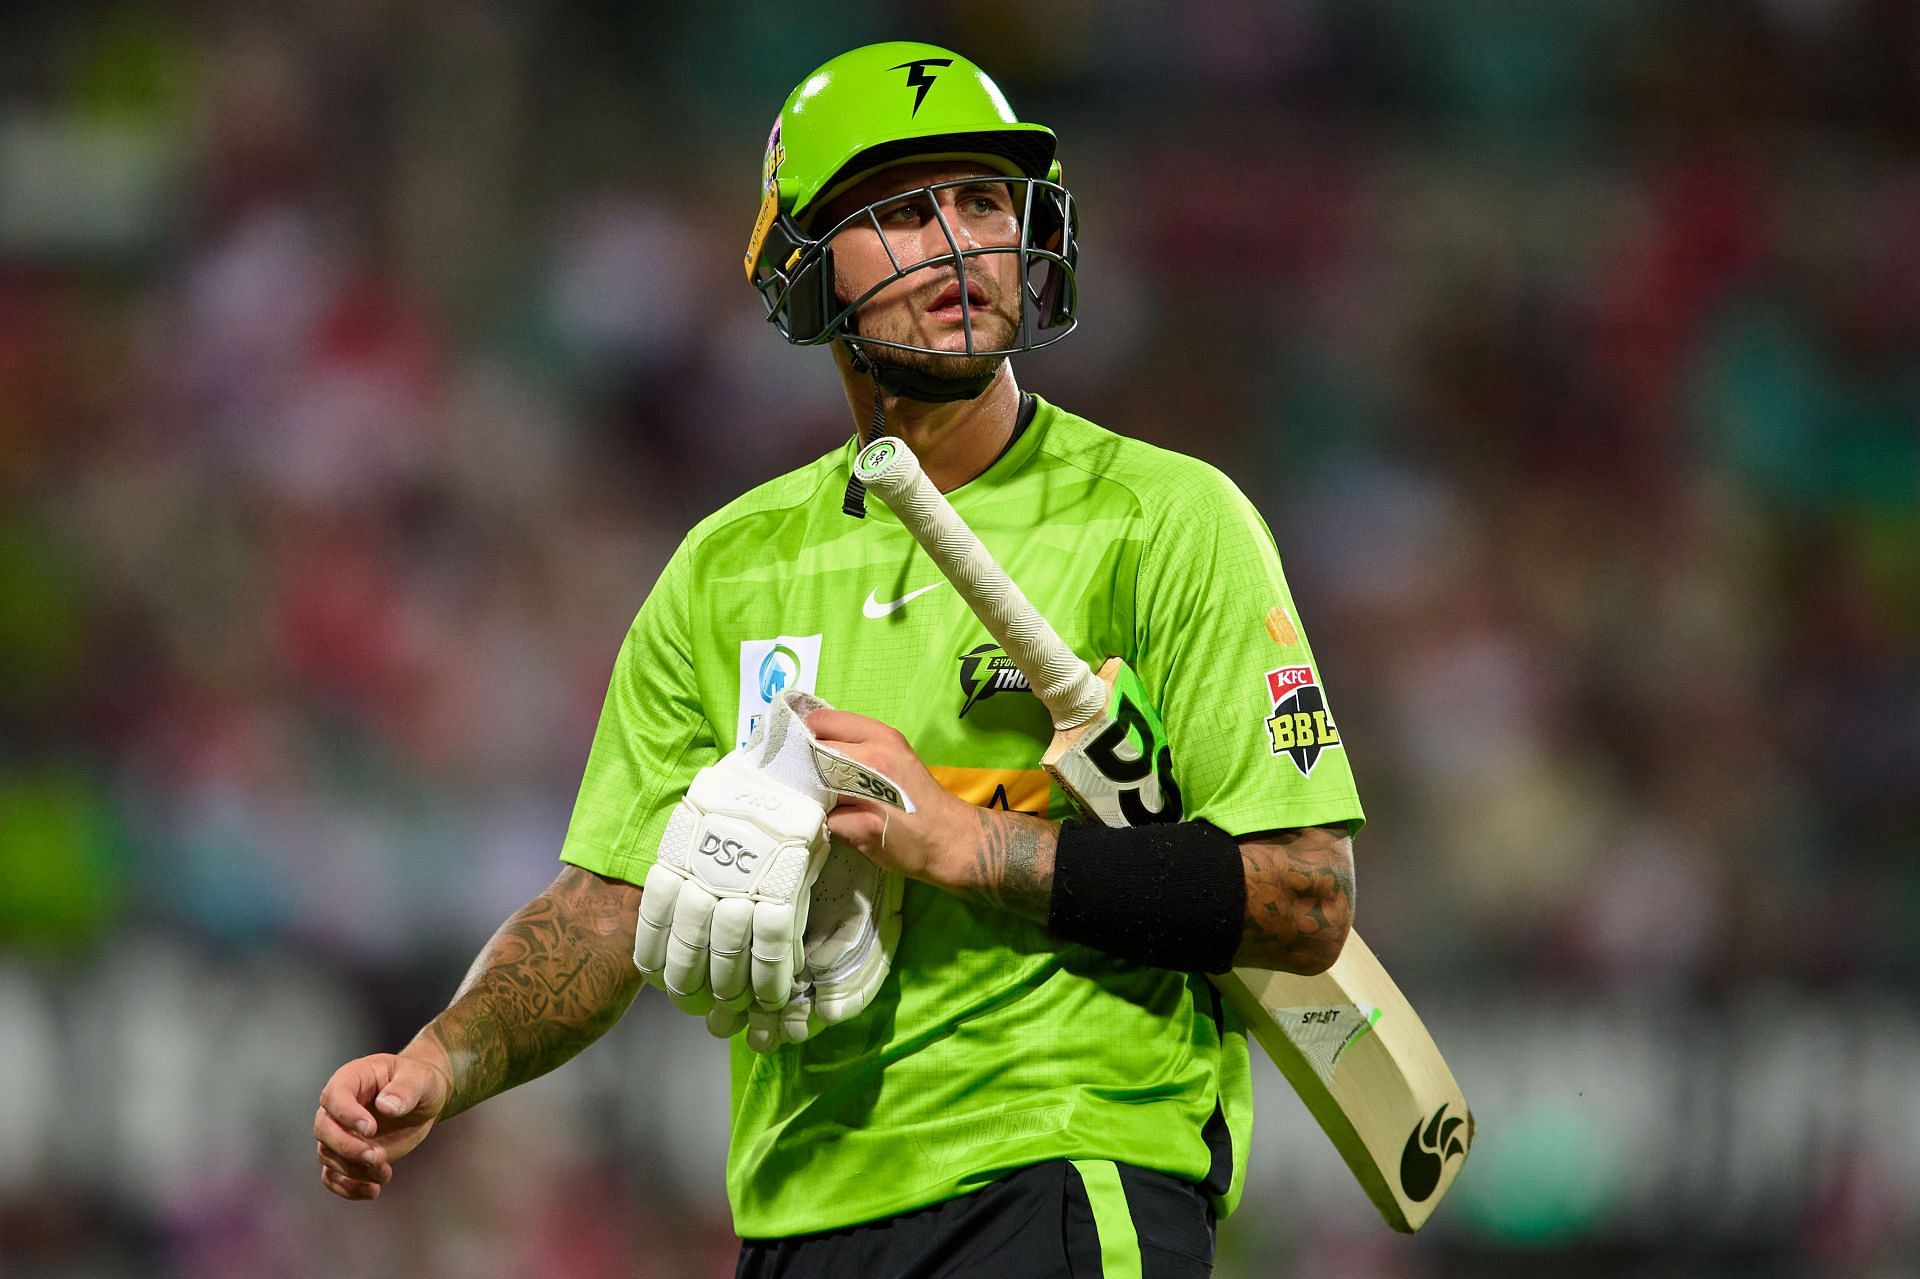 Alex Hales will not be a part of the upcoming IPL 2022